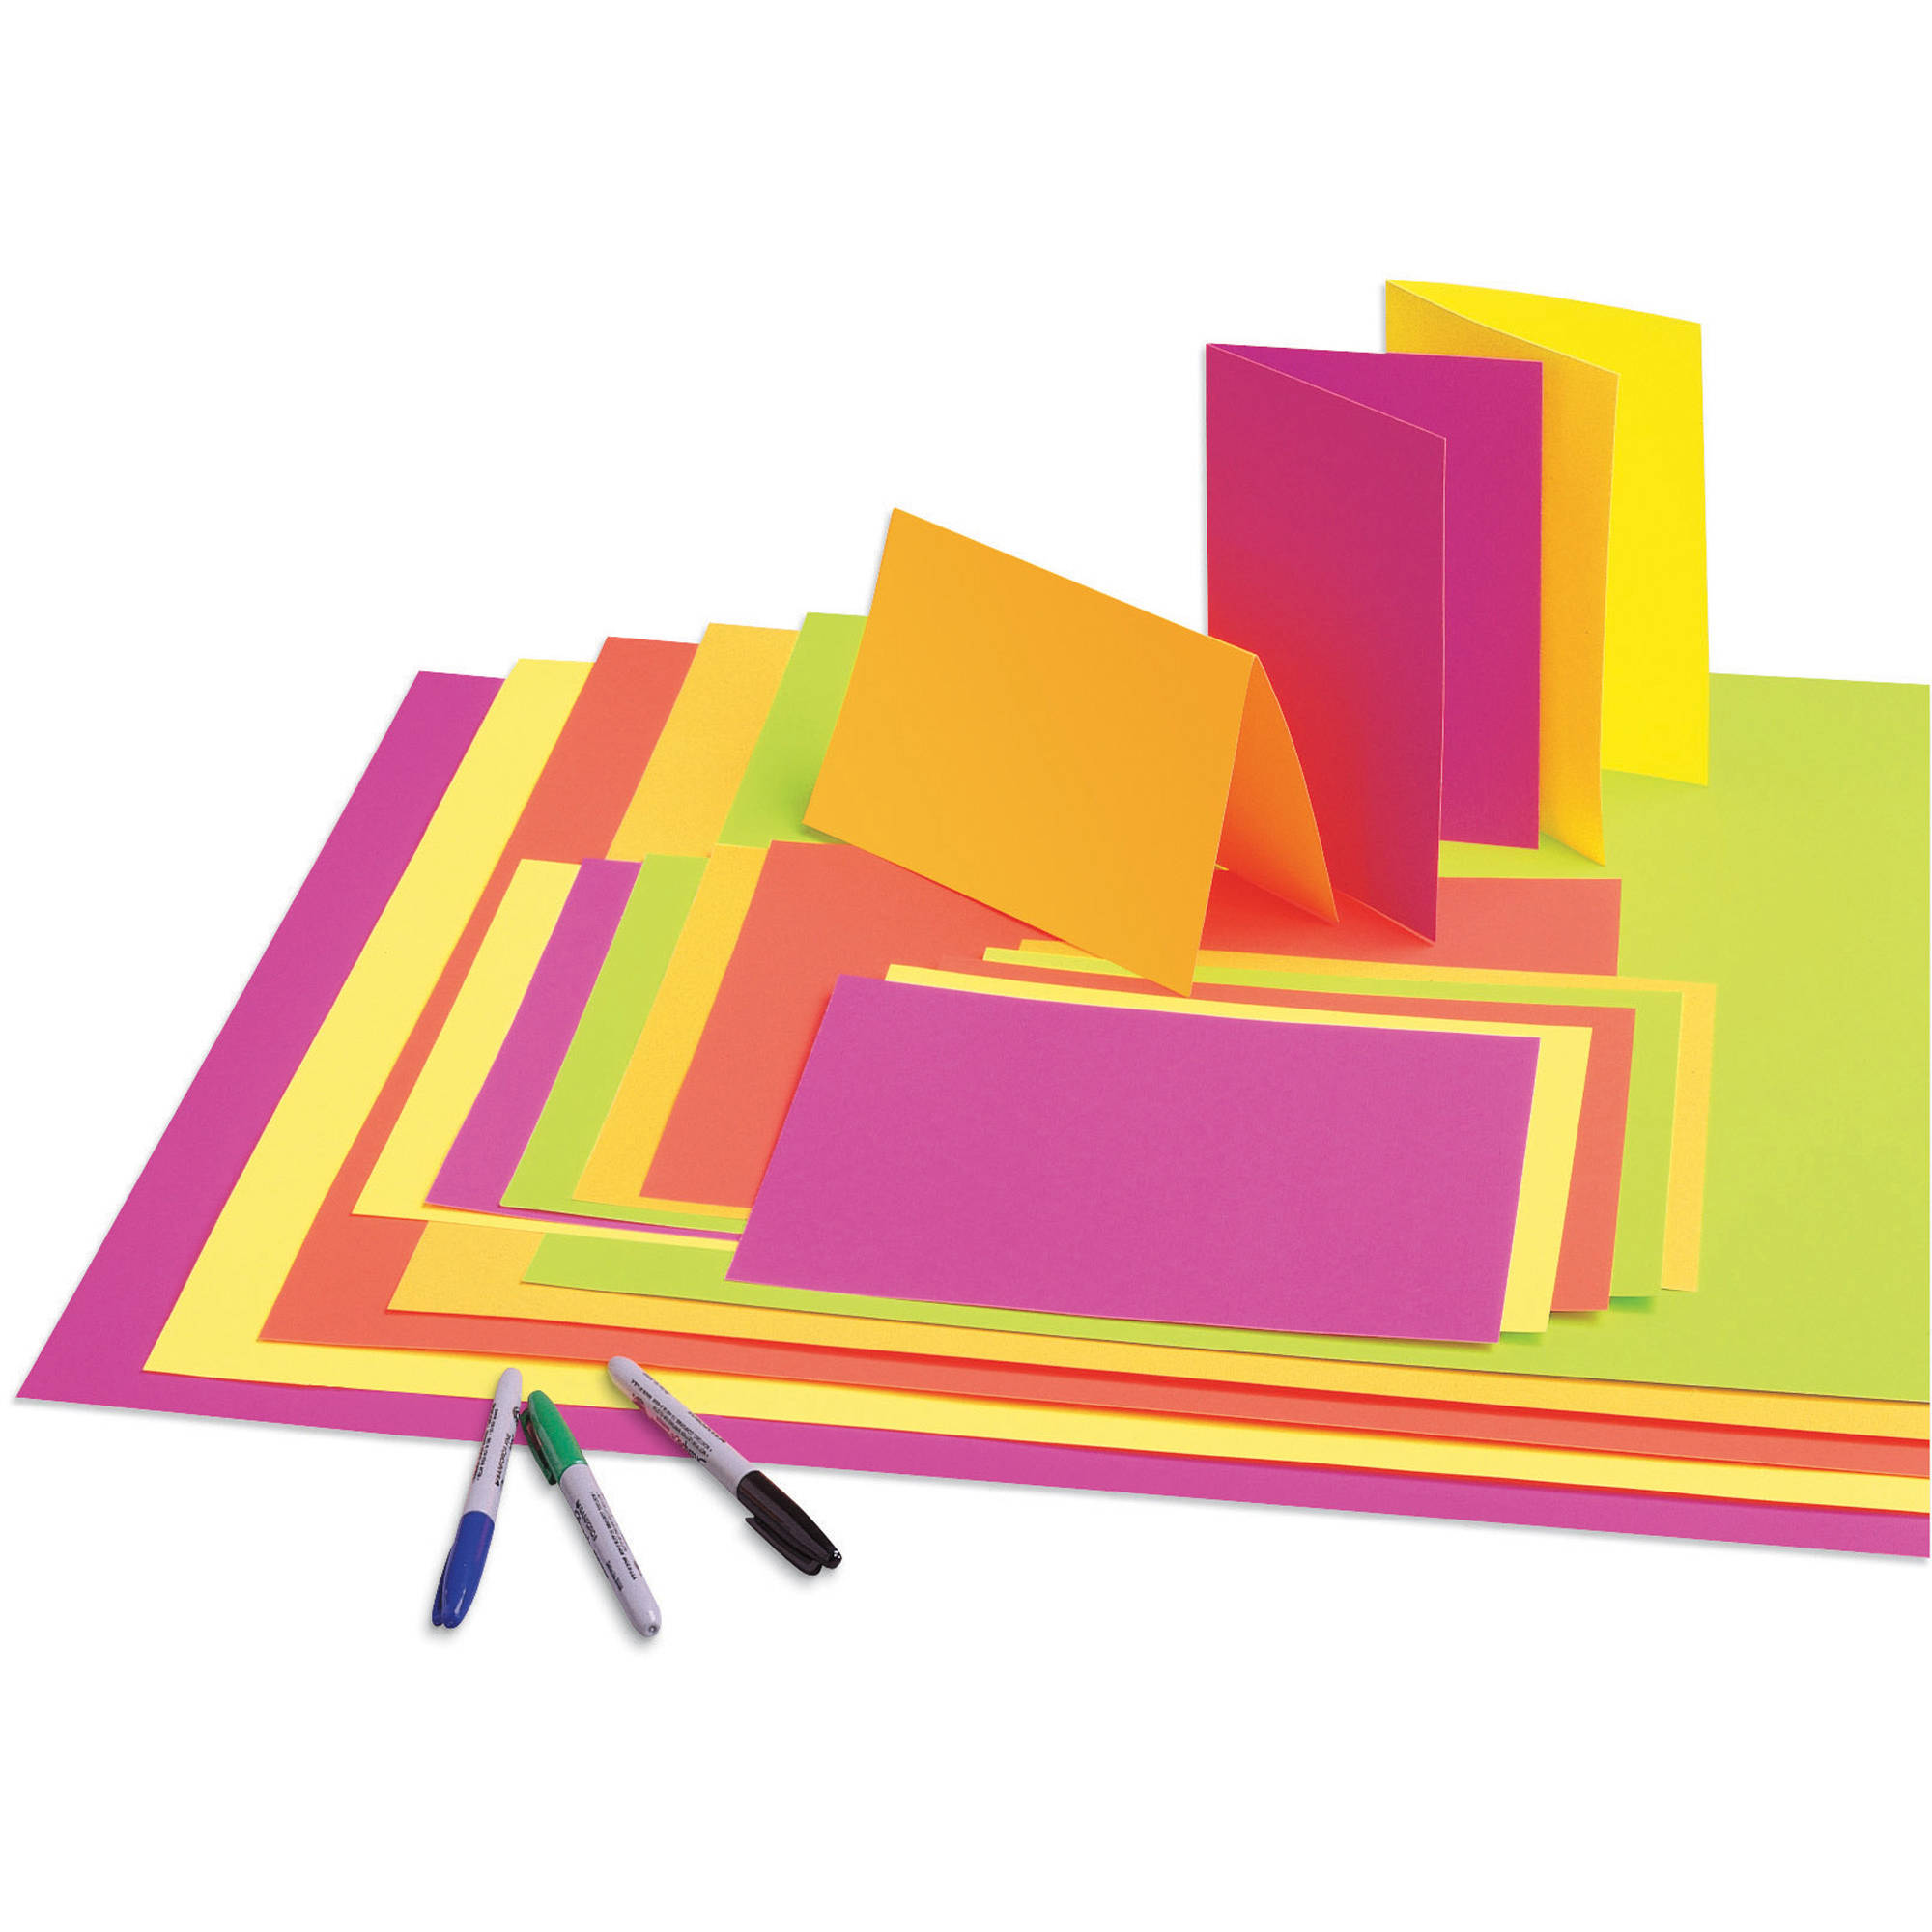 PaconÂ® Neon Poster Board, 22" x 28", Assorted Neon Colors, 25 Sheets - image 3 of 5